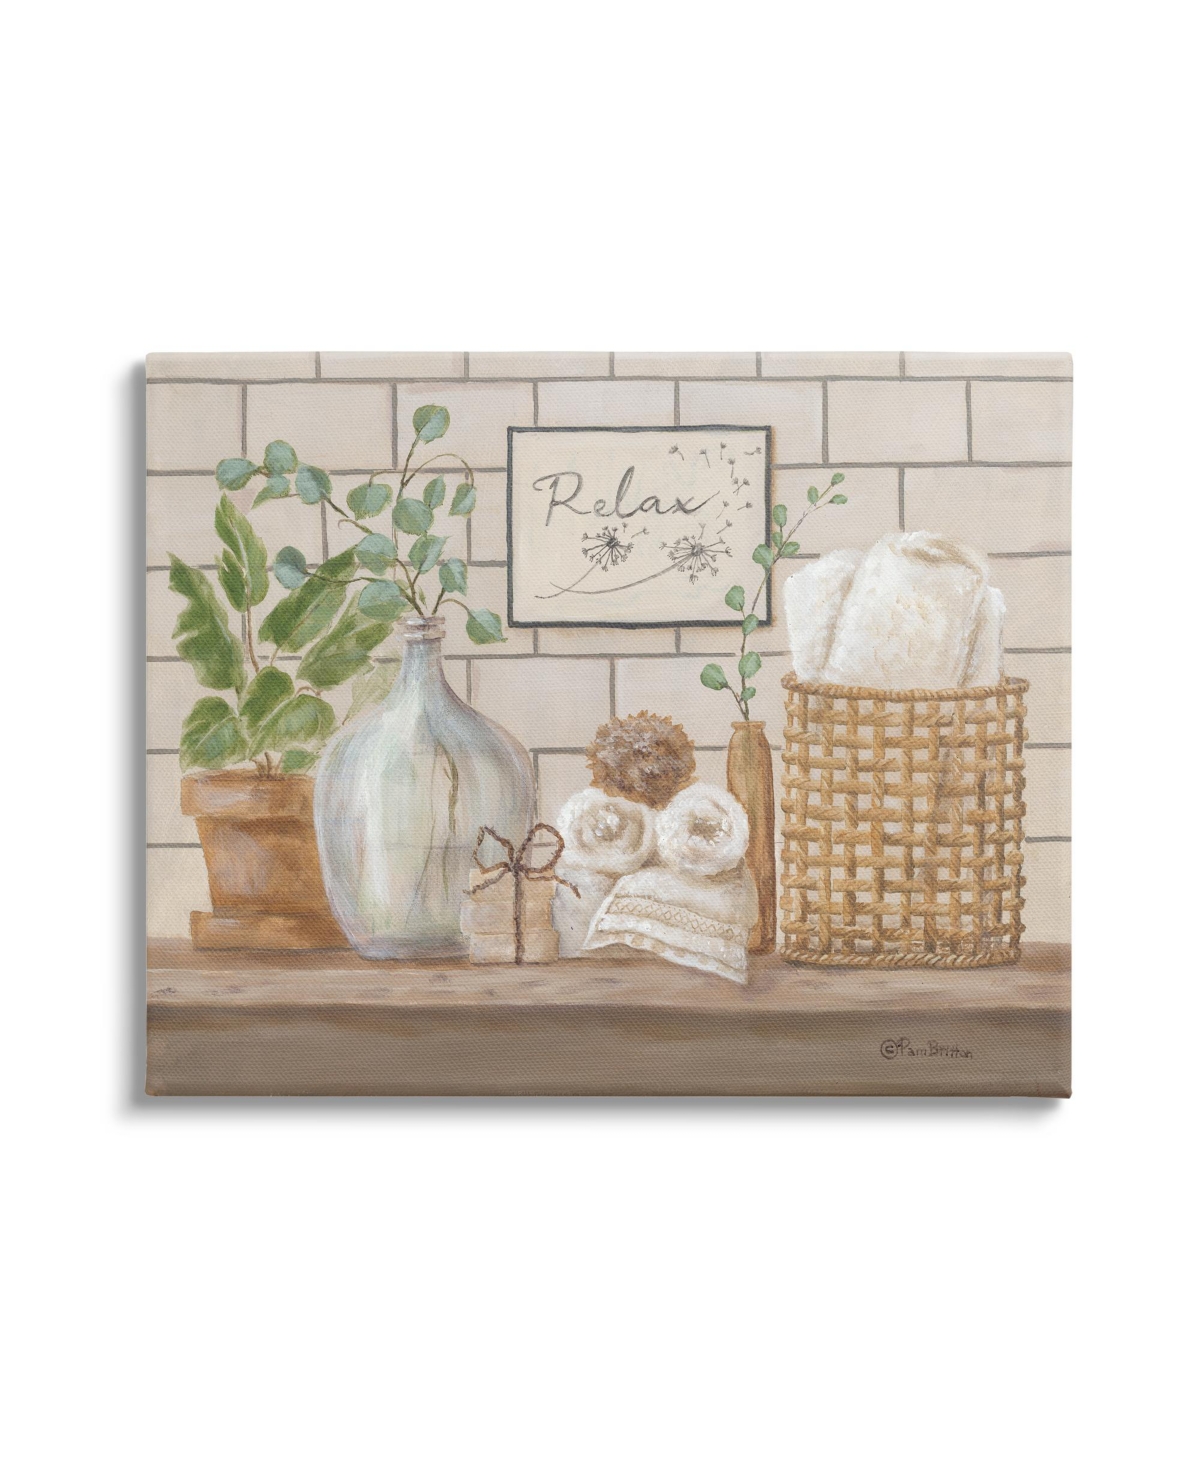 Stupell Industries Relax Uplifting Bathroom Scene Canvas Wall Art, 24" X 1.5" X 30" In Multi-color